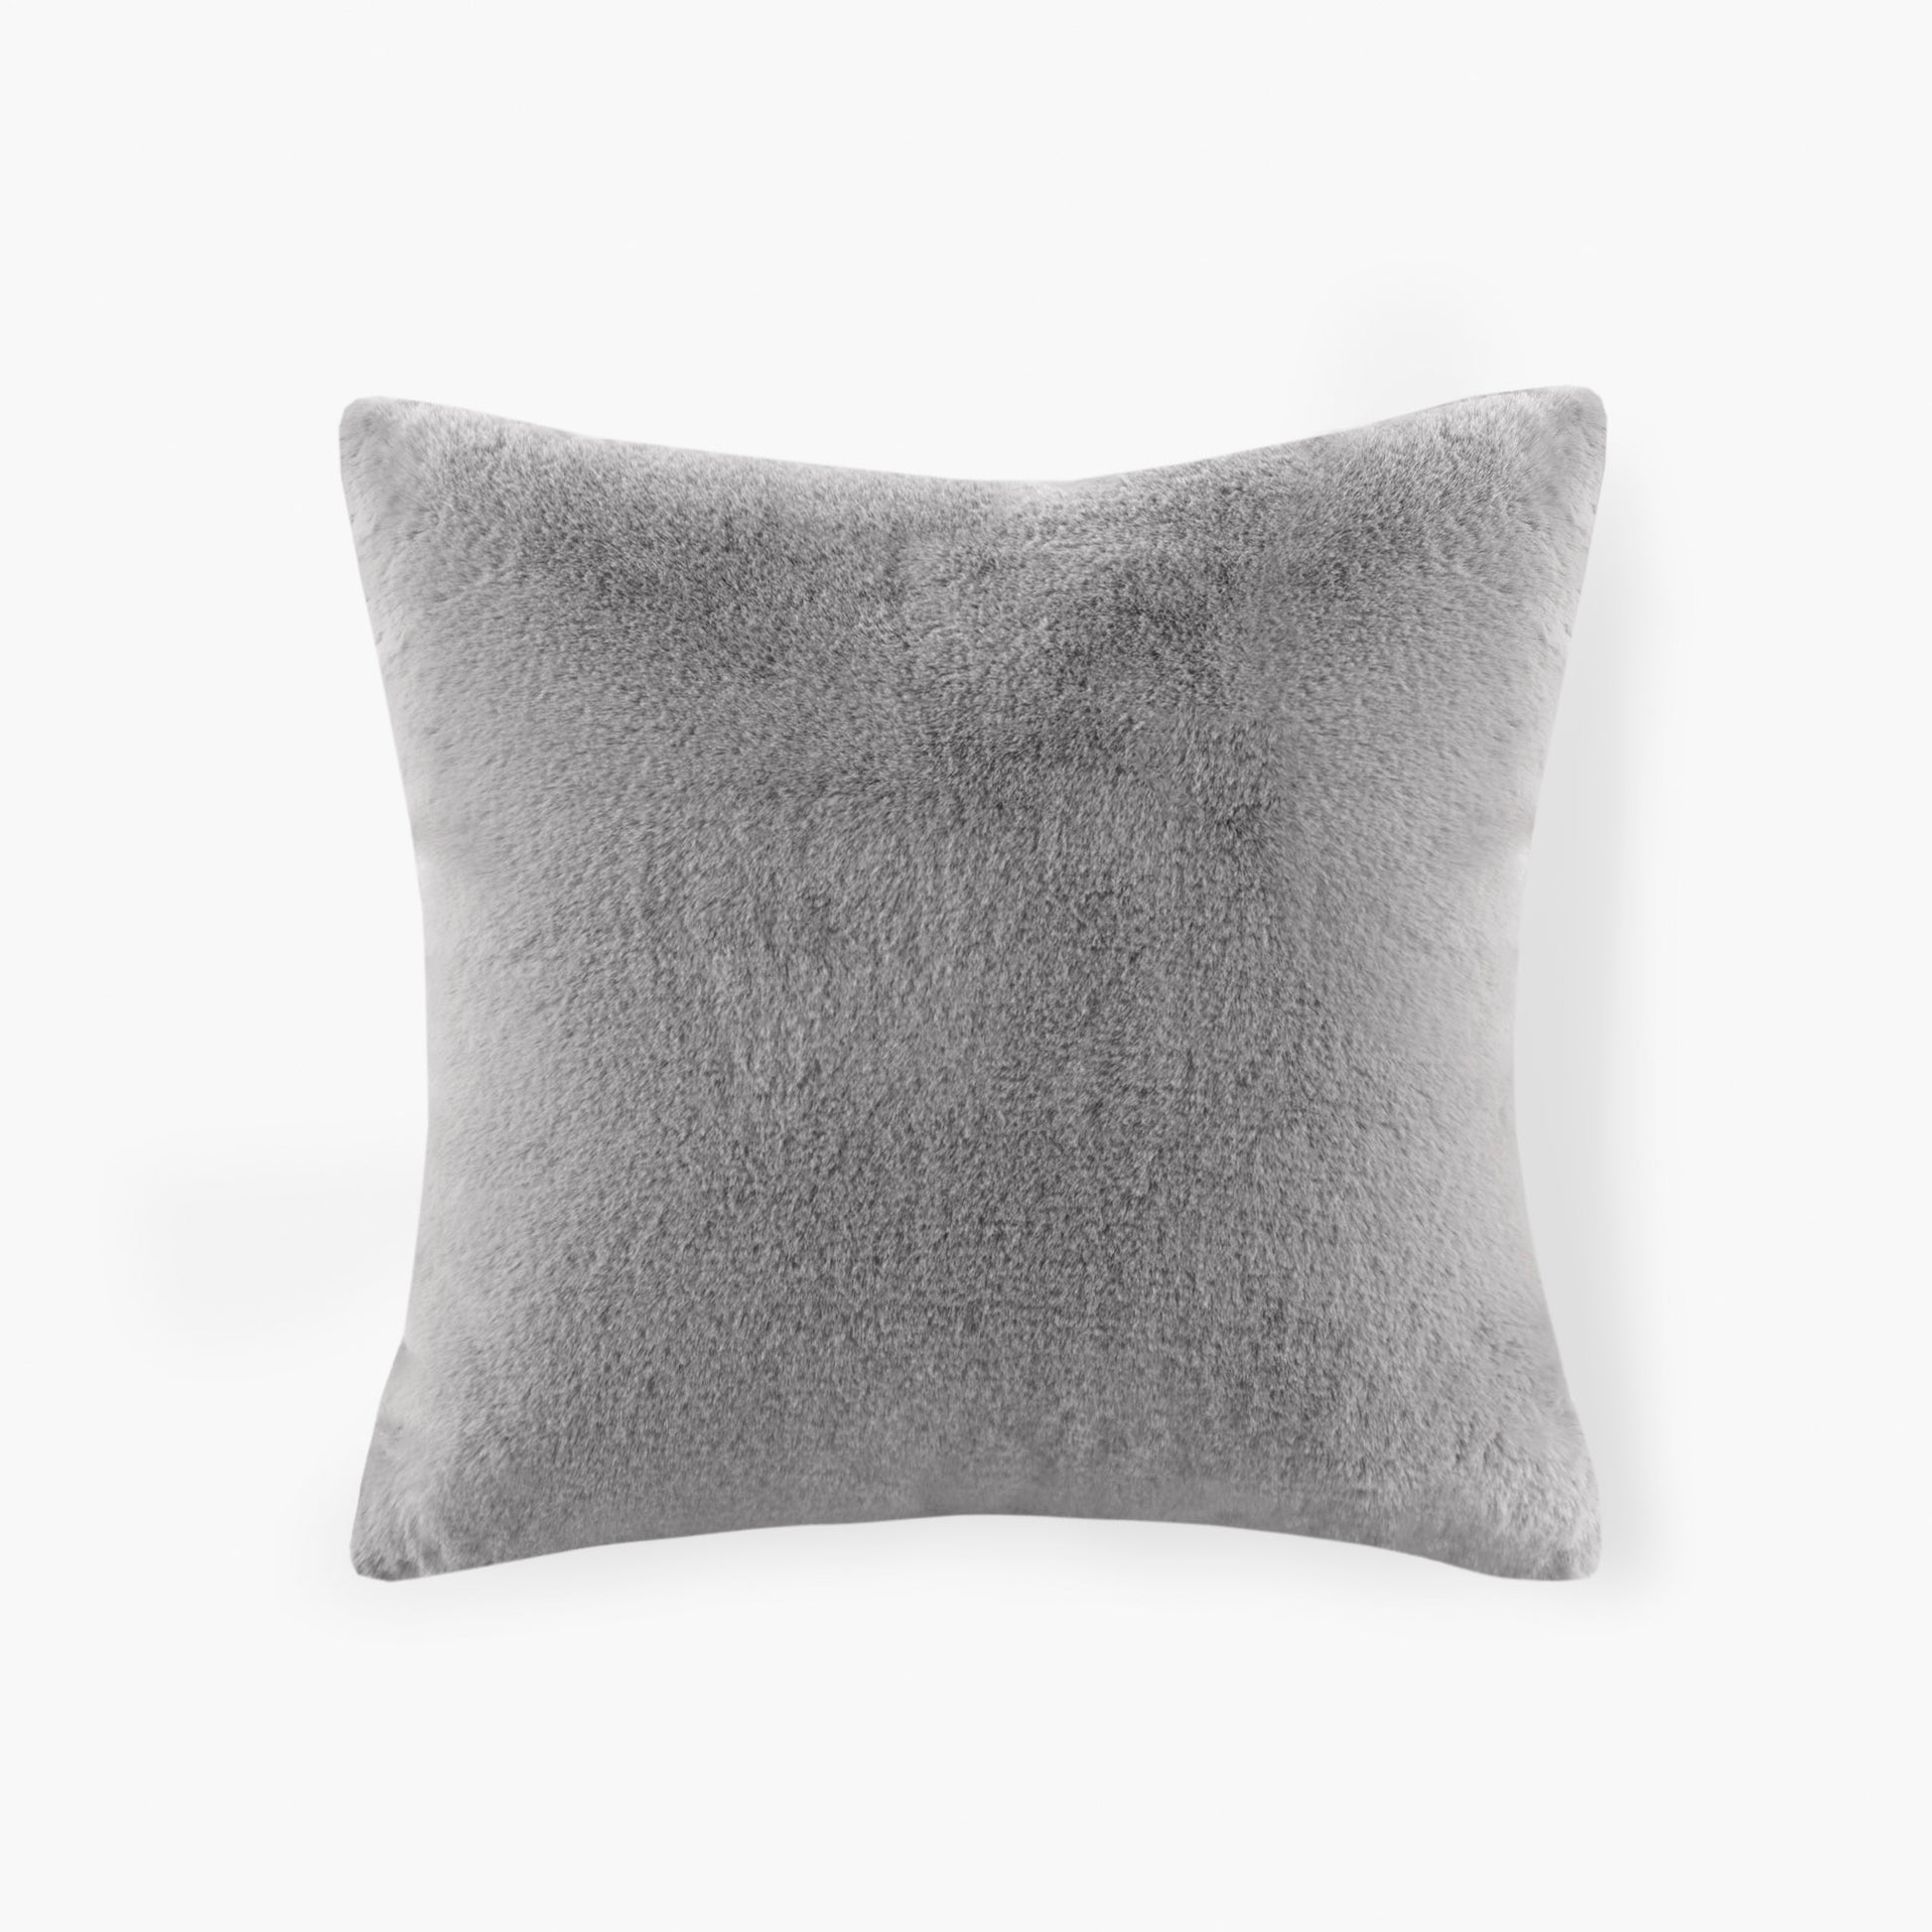 Croscil Solid Sable Fur Pillow with Zipper